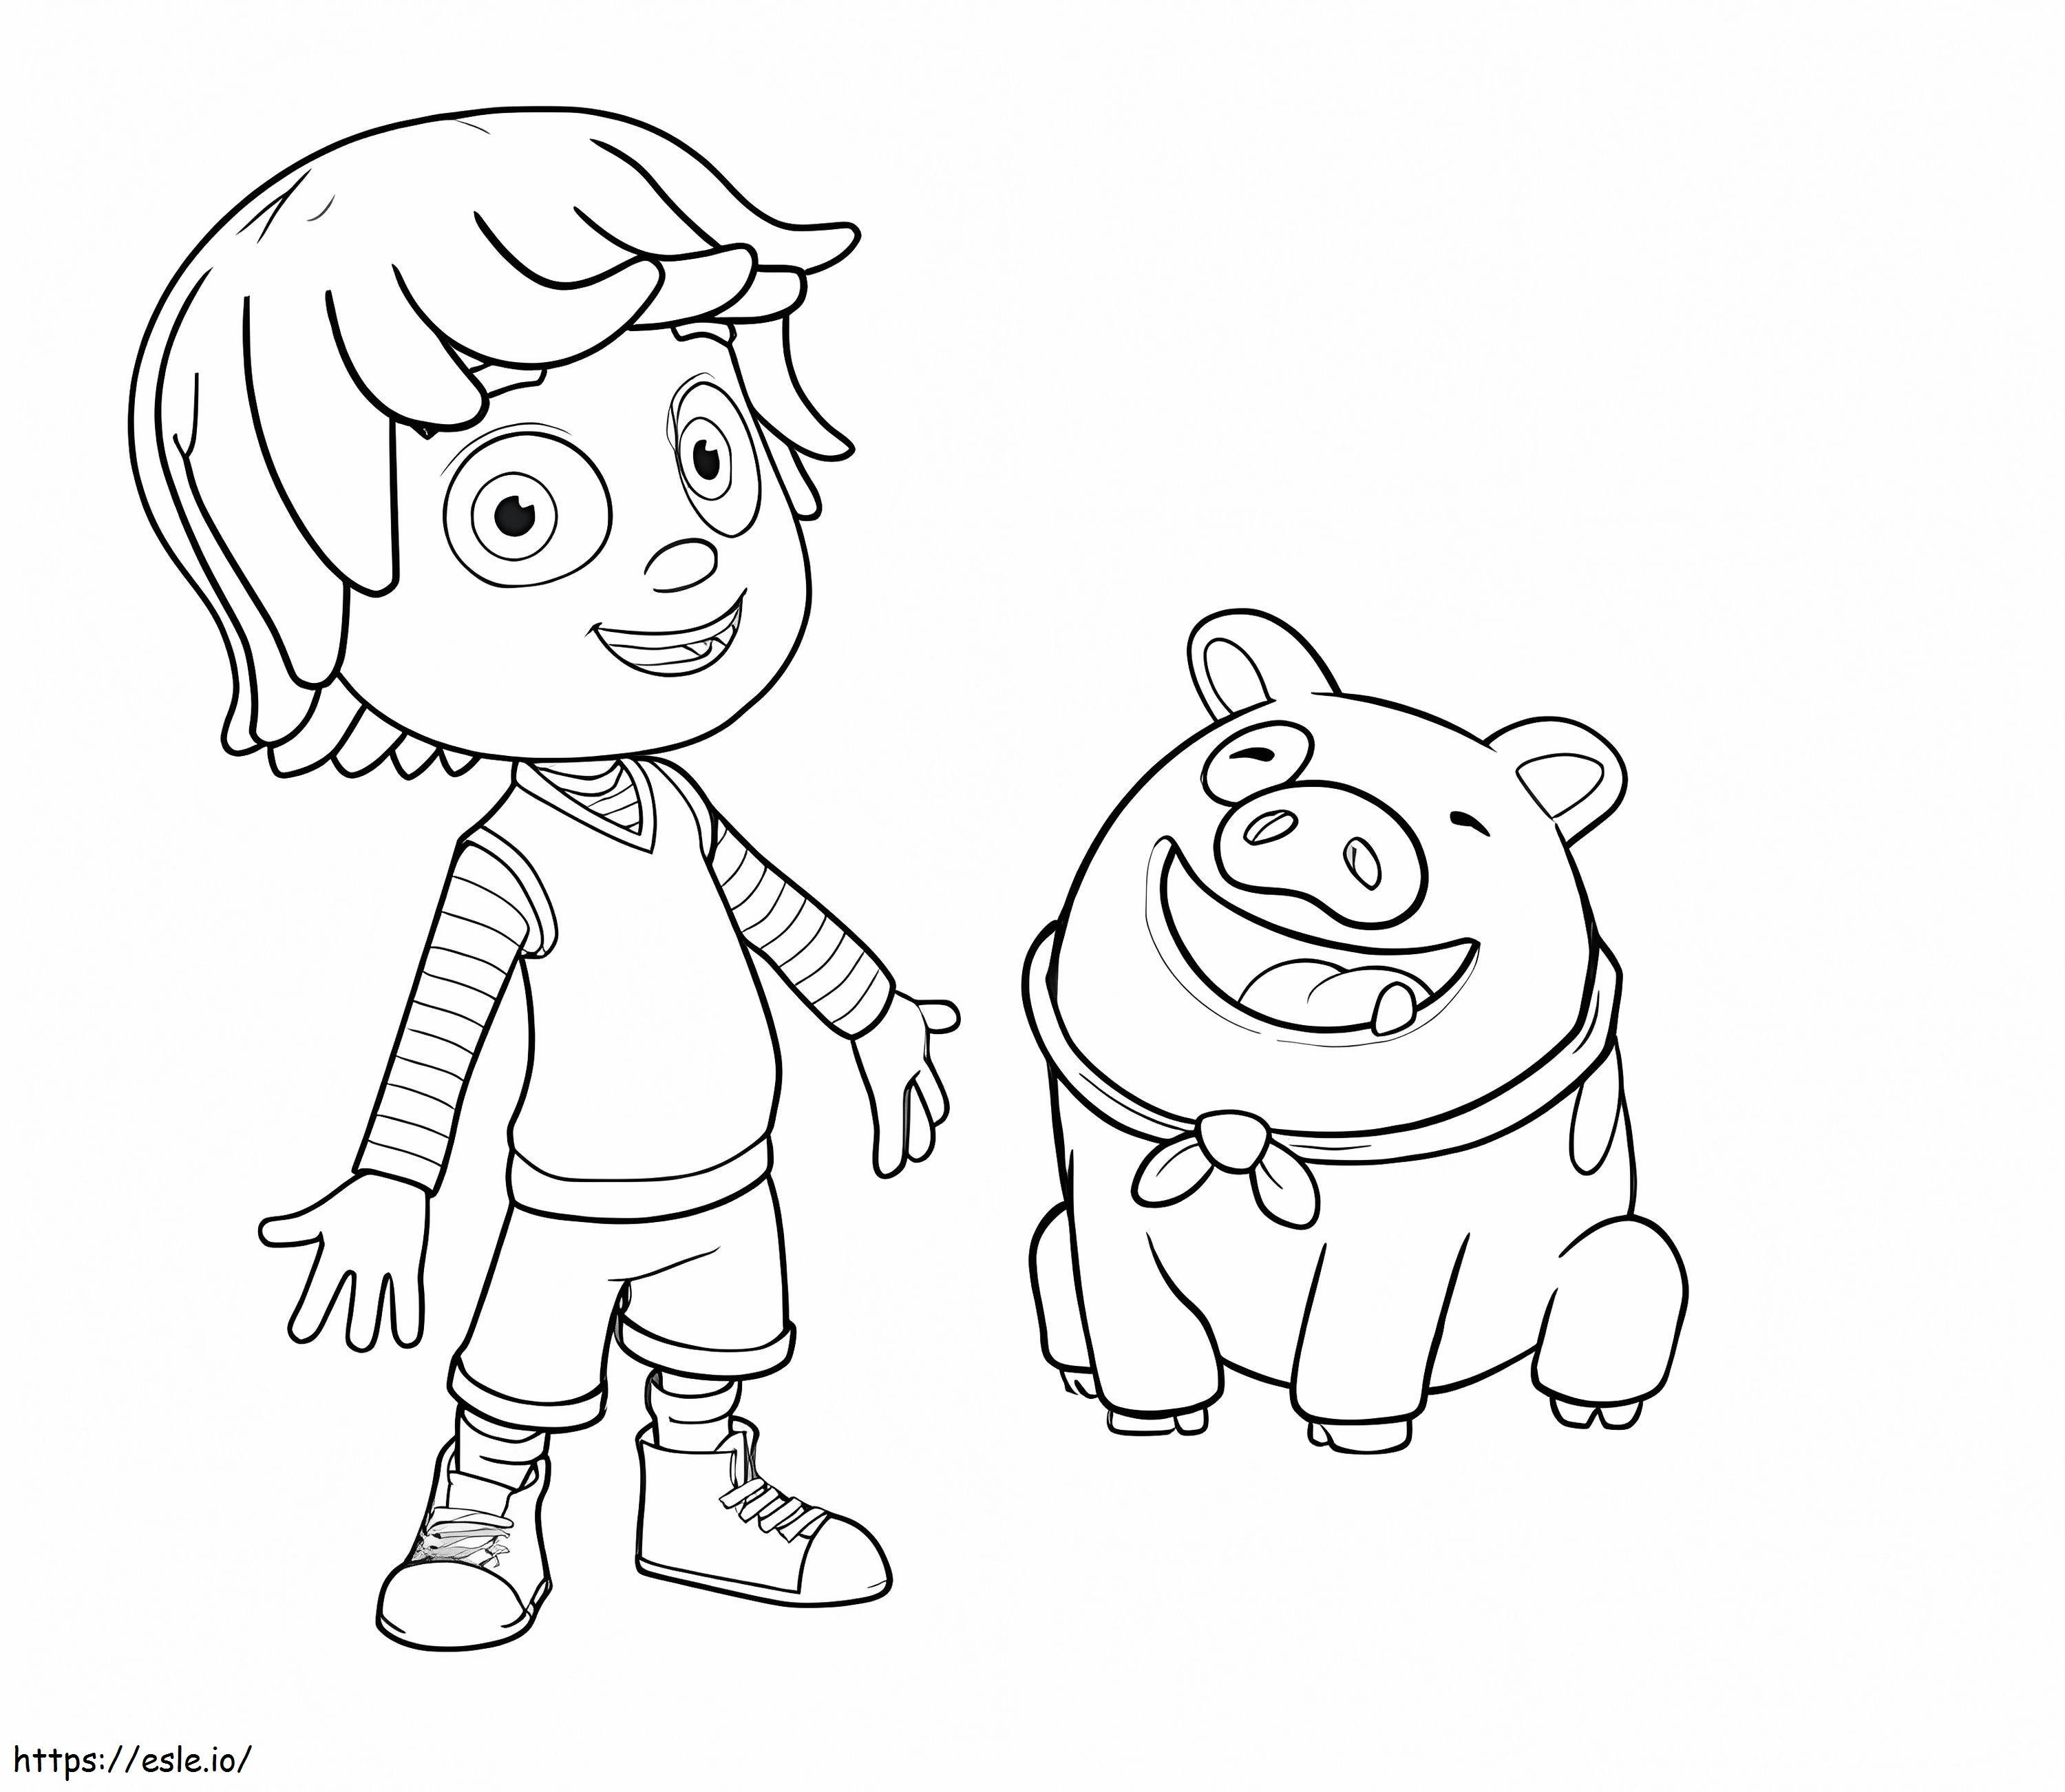 1581302881_Kazoops Monty And Jimmy Jones coloring page